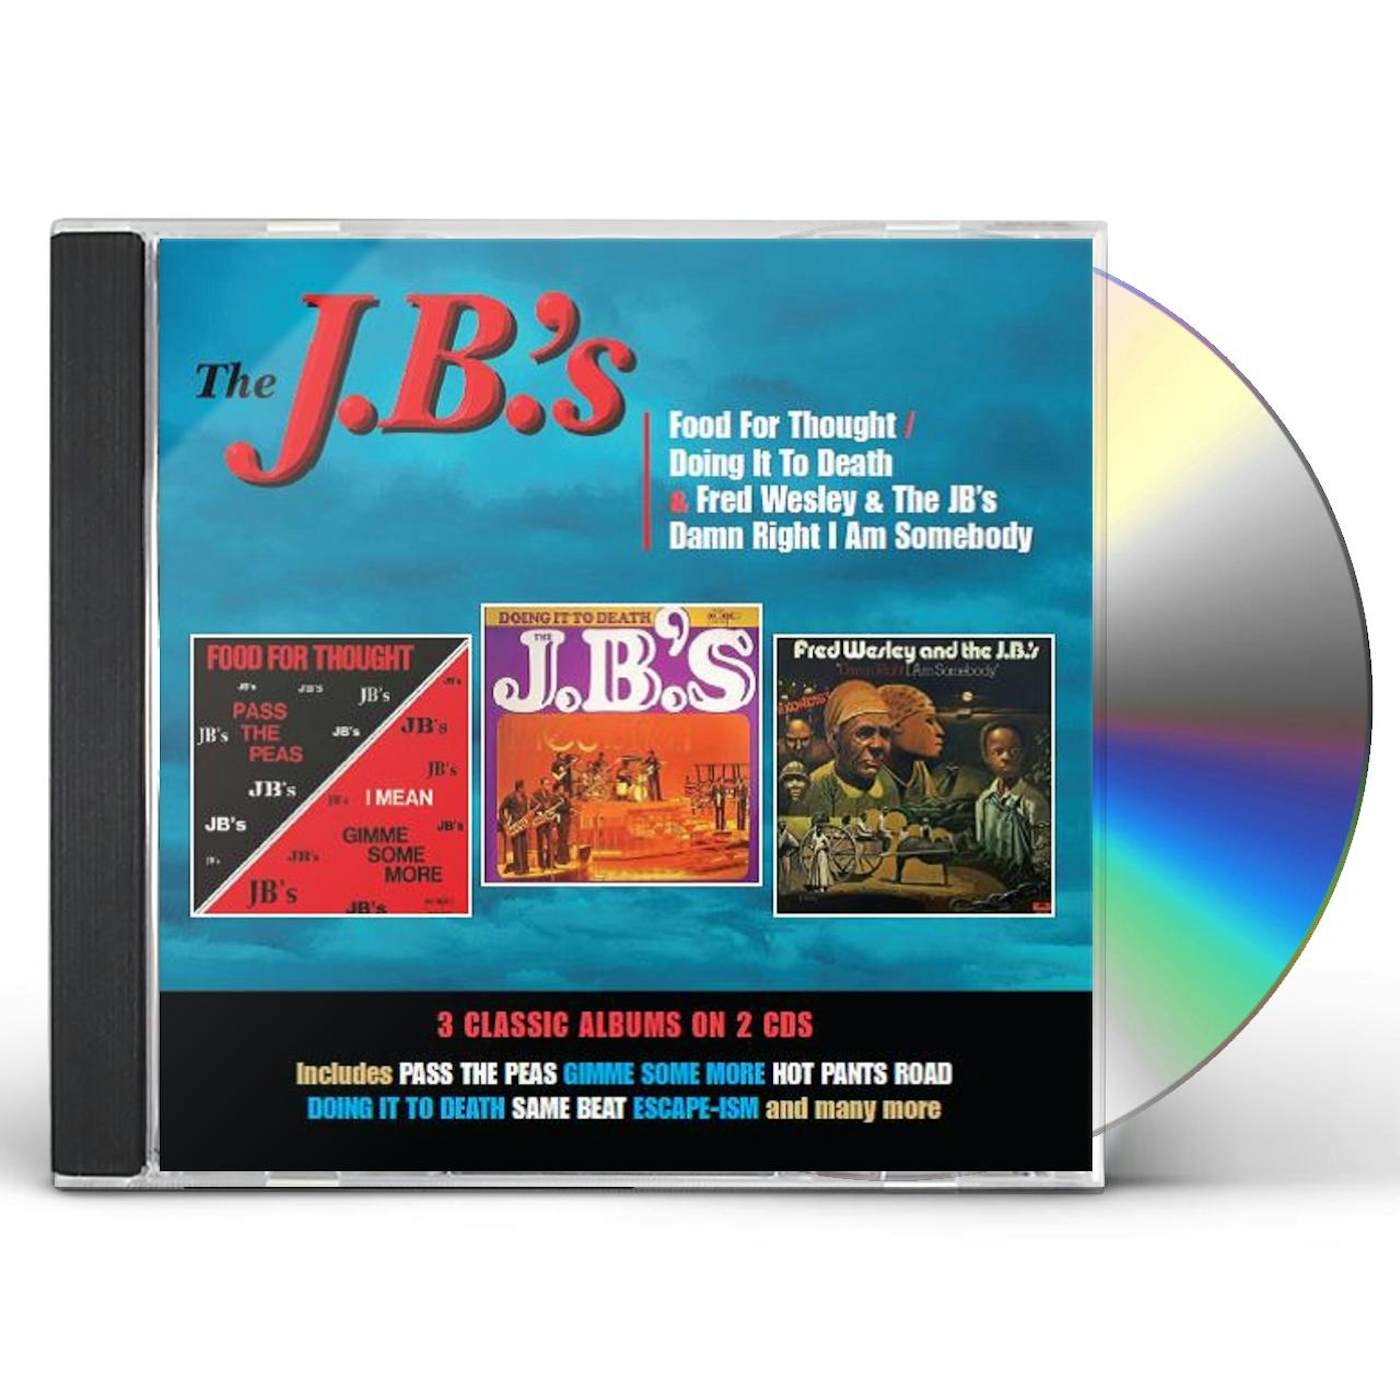 The J.B.'s Food For Thought/Doing It To Death/Damn CD